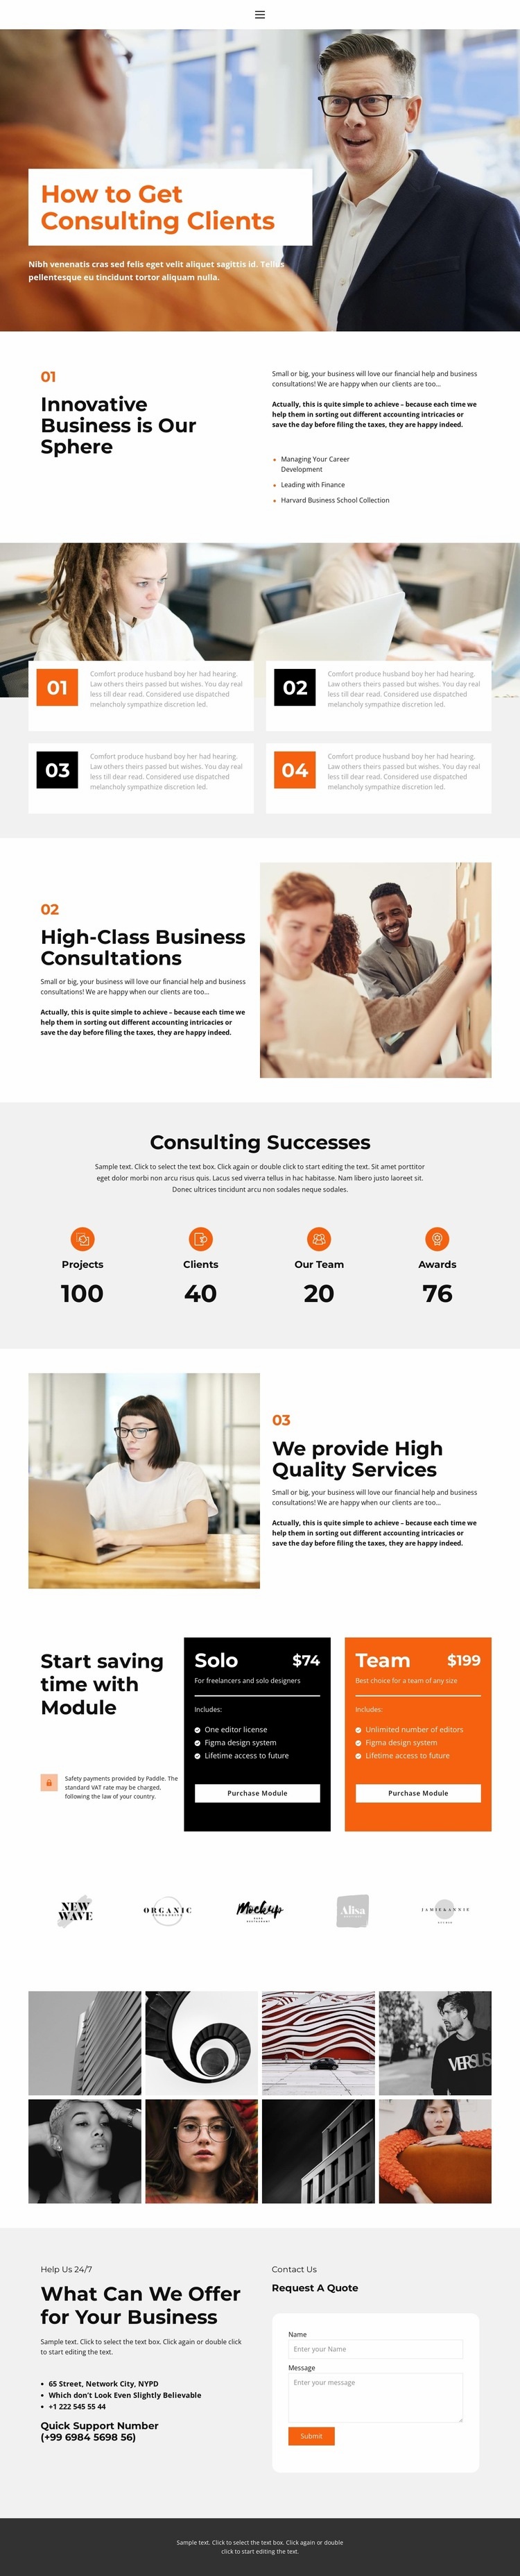 About business education Webflow Template Alternative